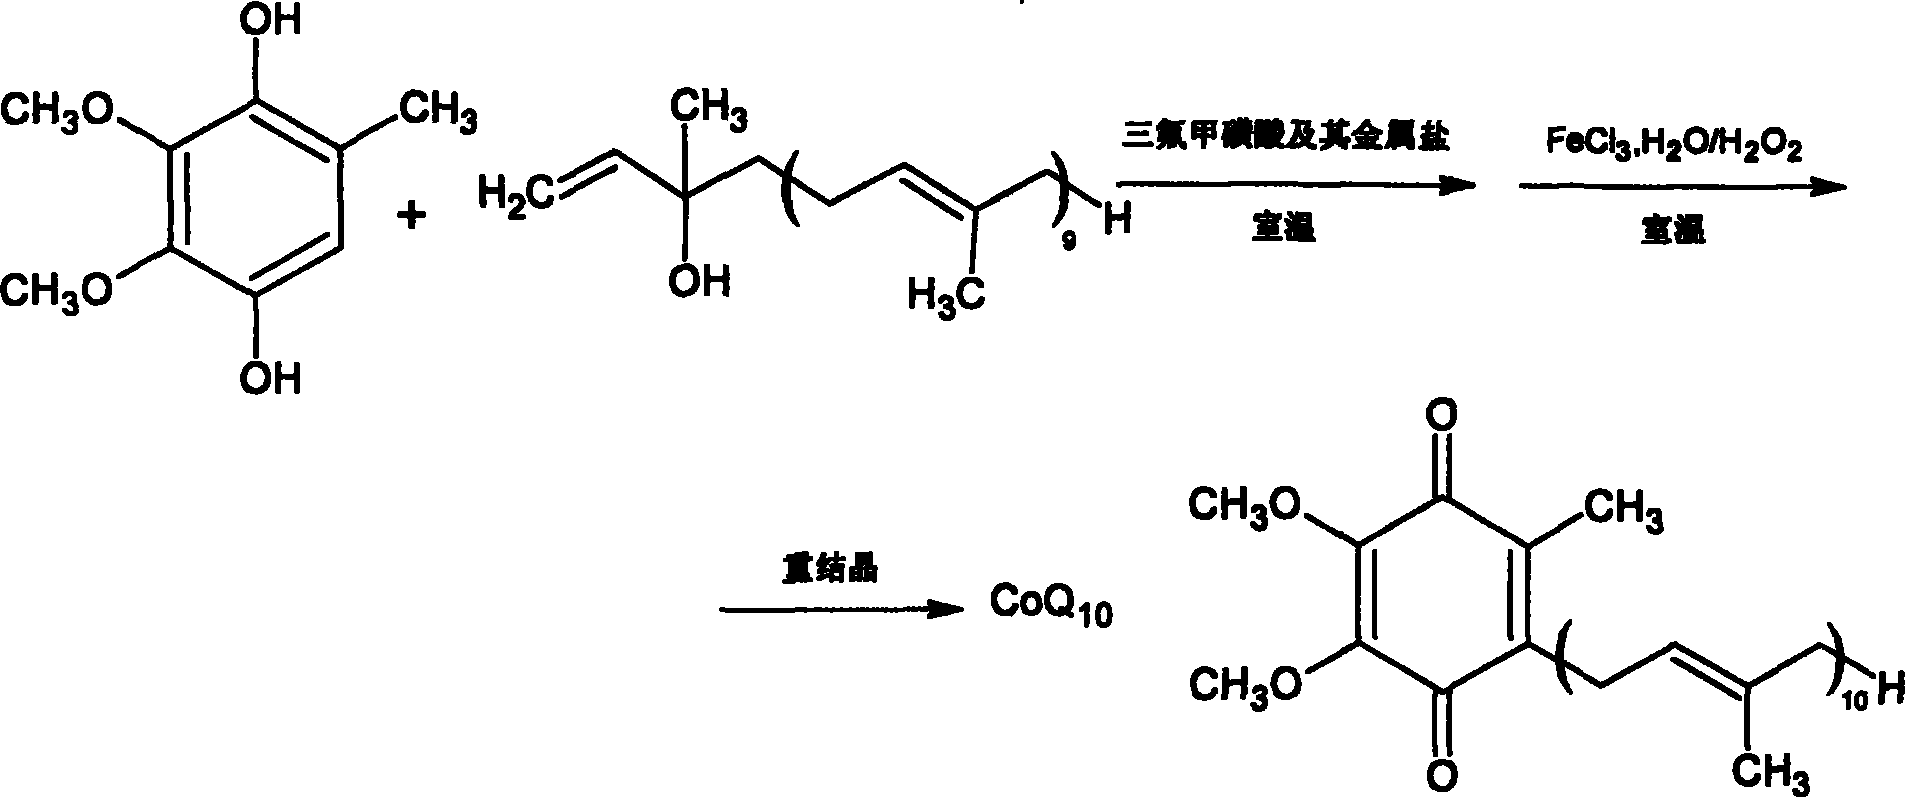 Coenzyme Q10 synthesizing process